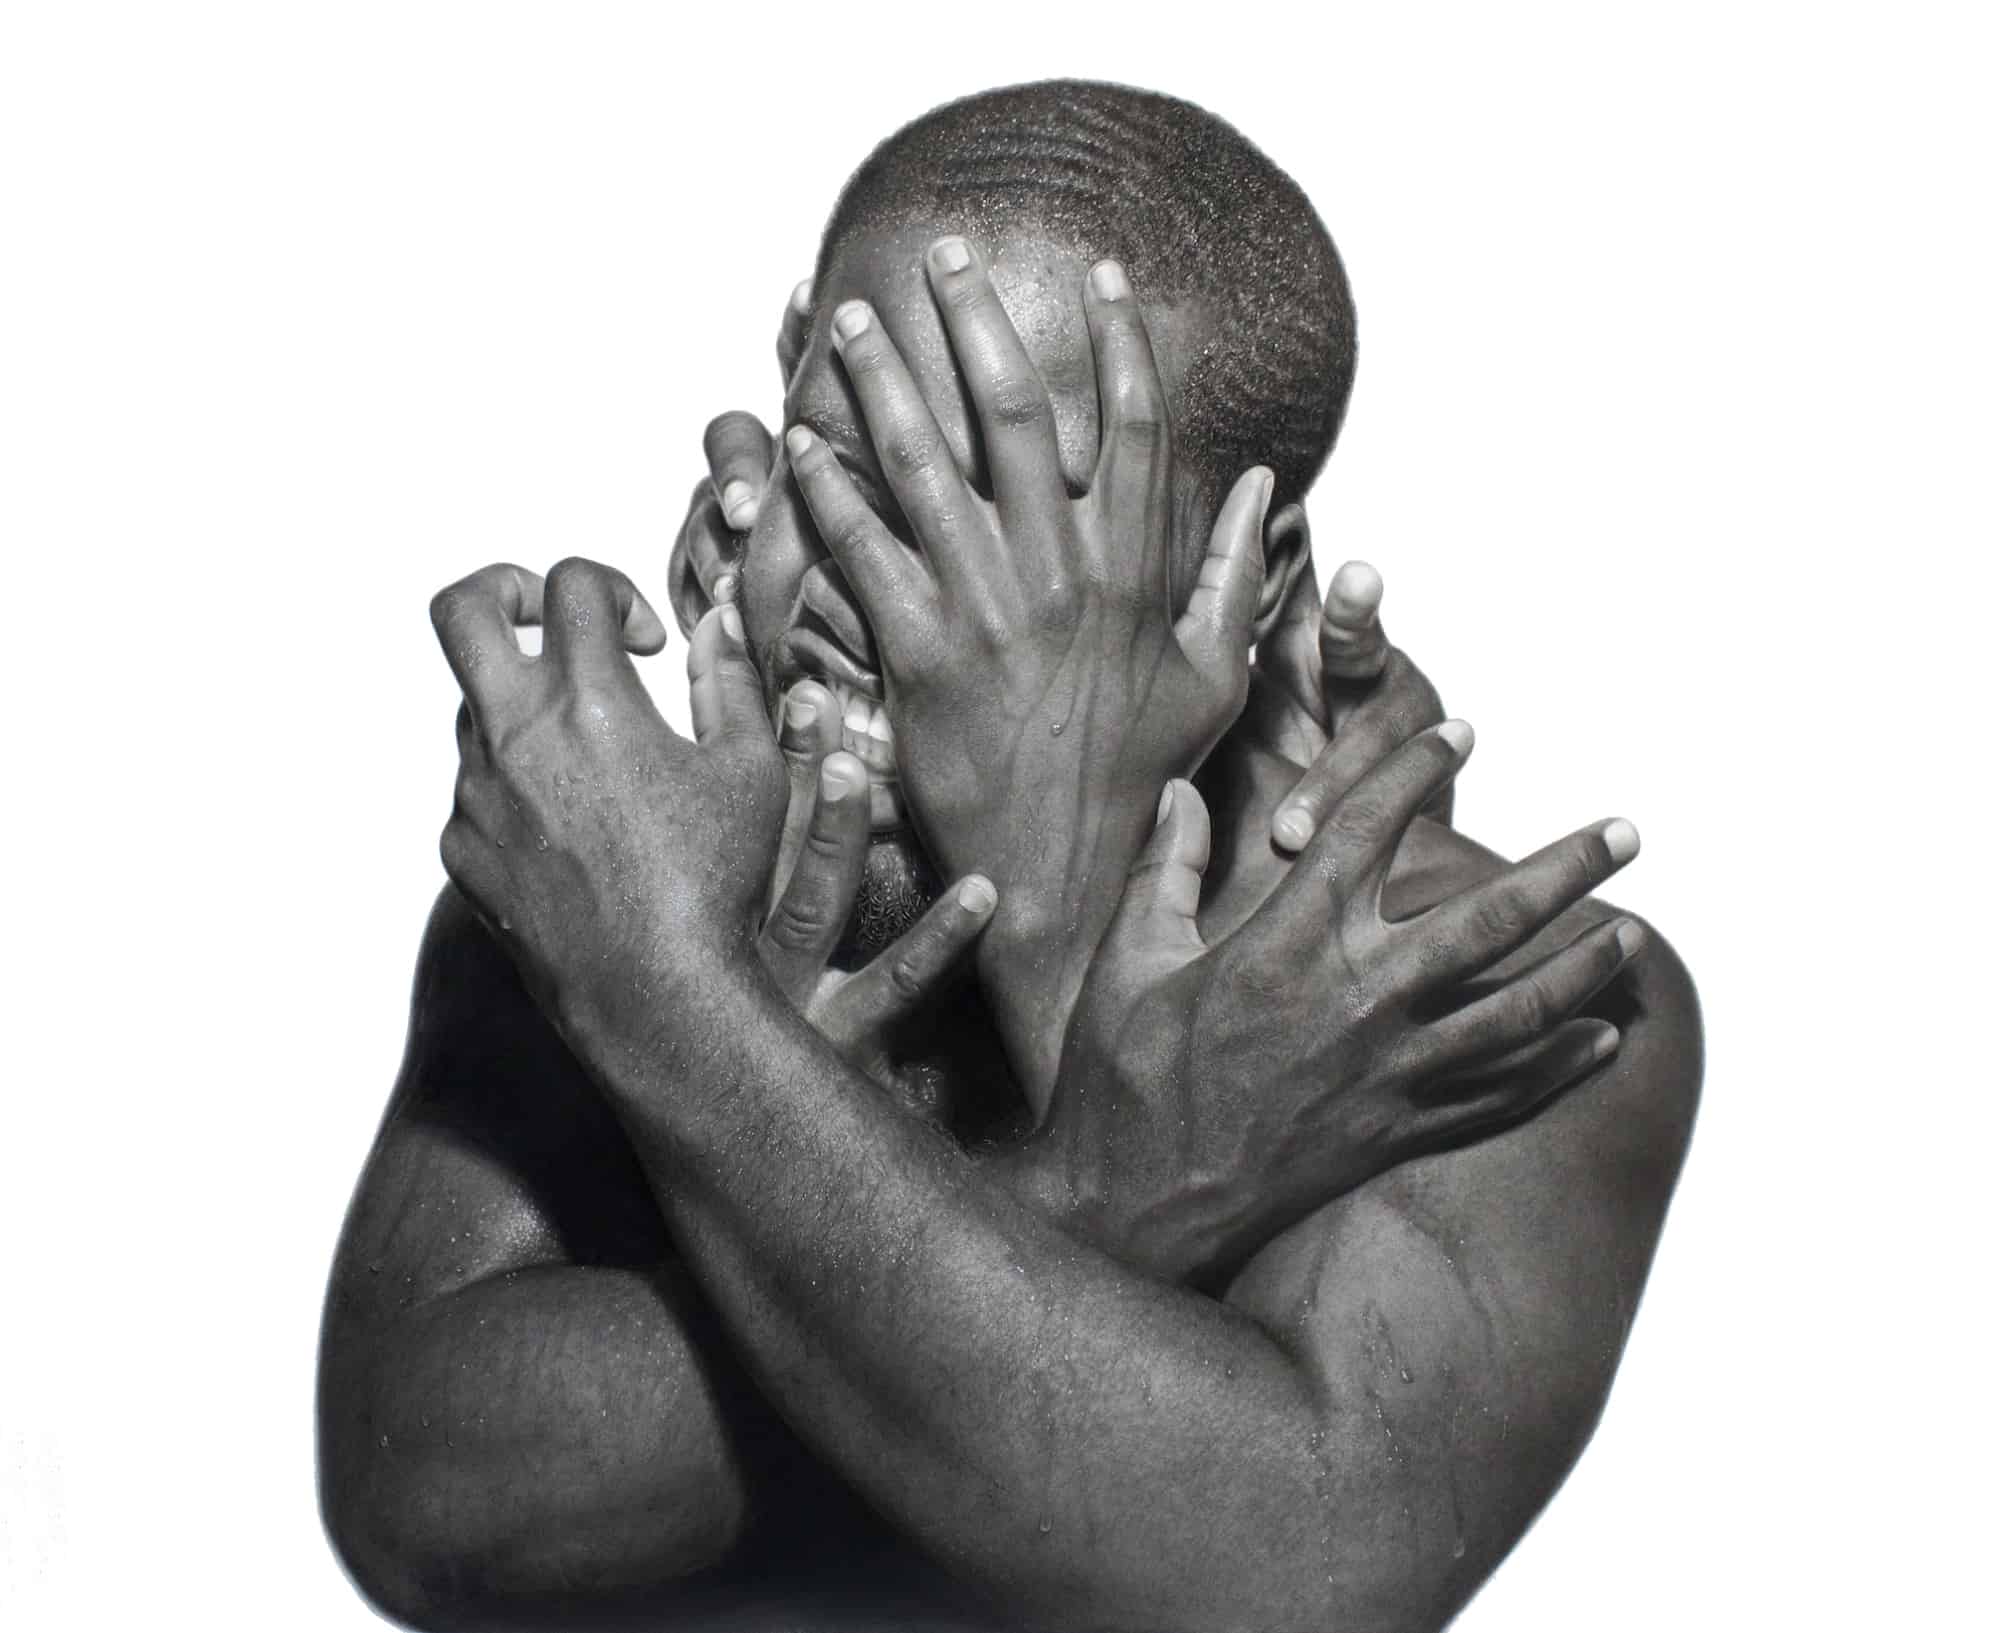 Hands pull and cover at a man's face